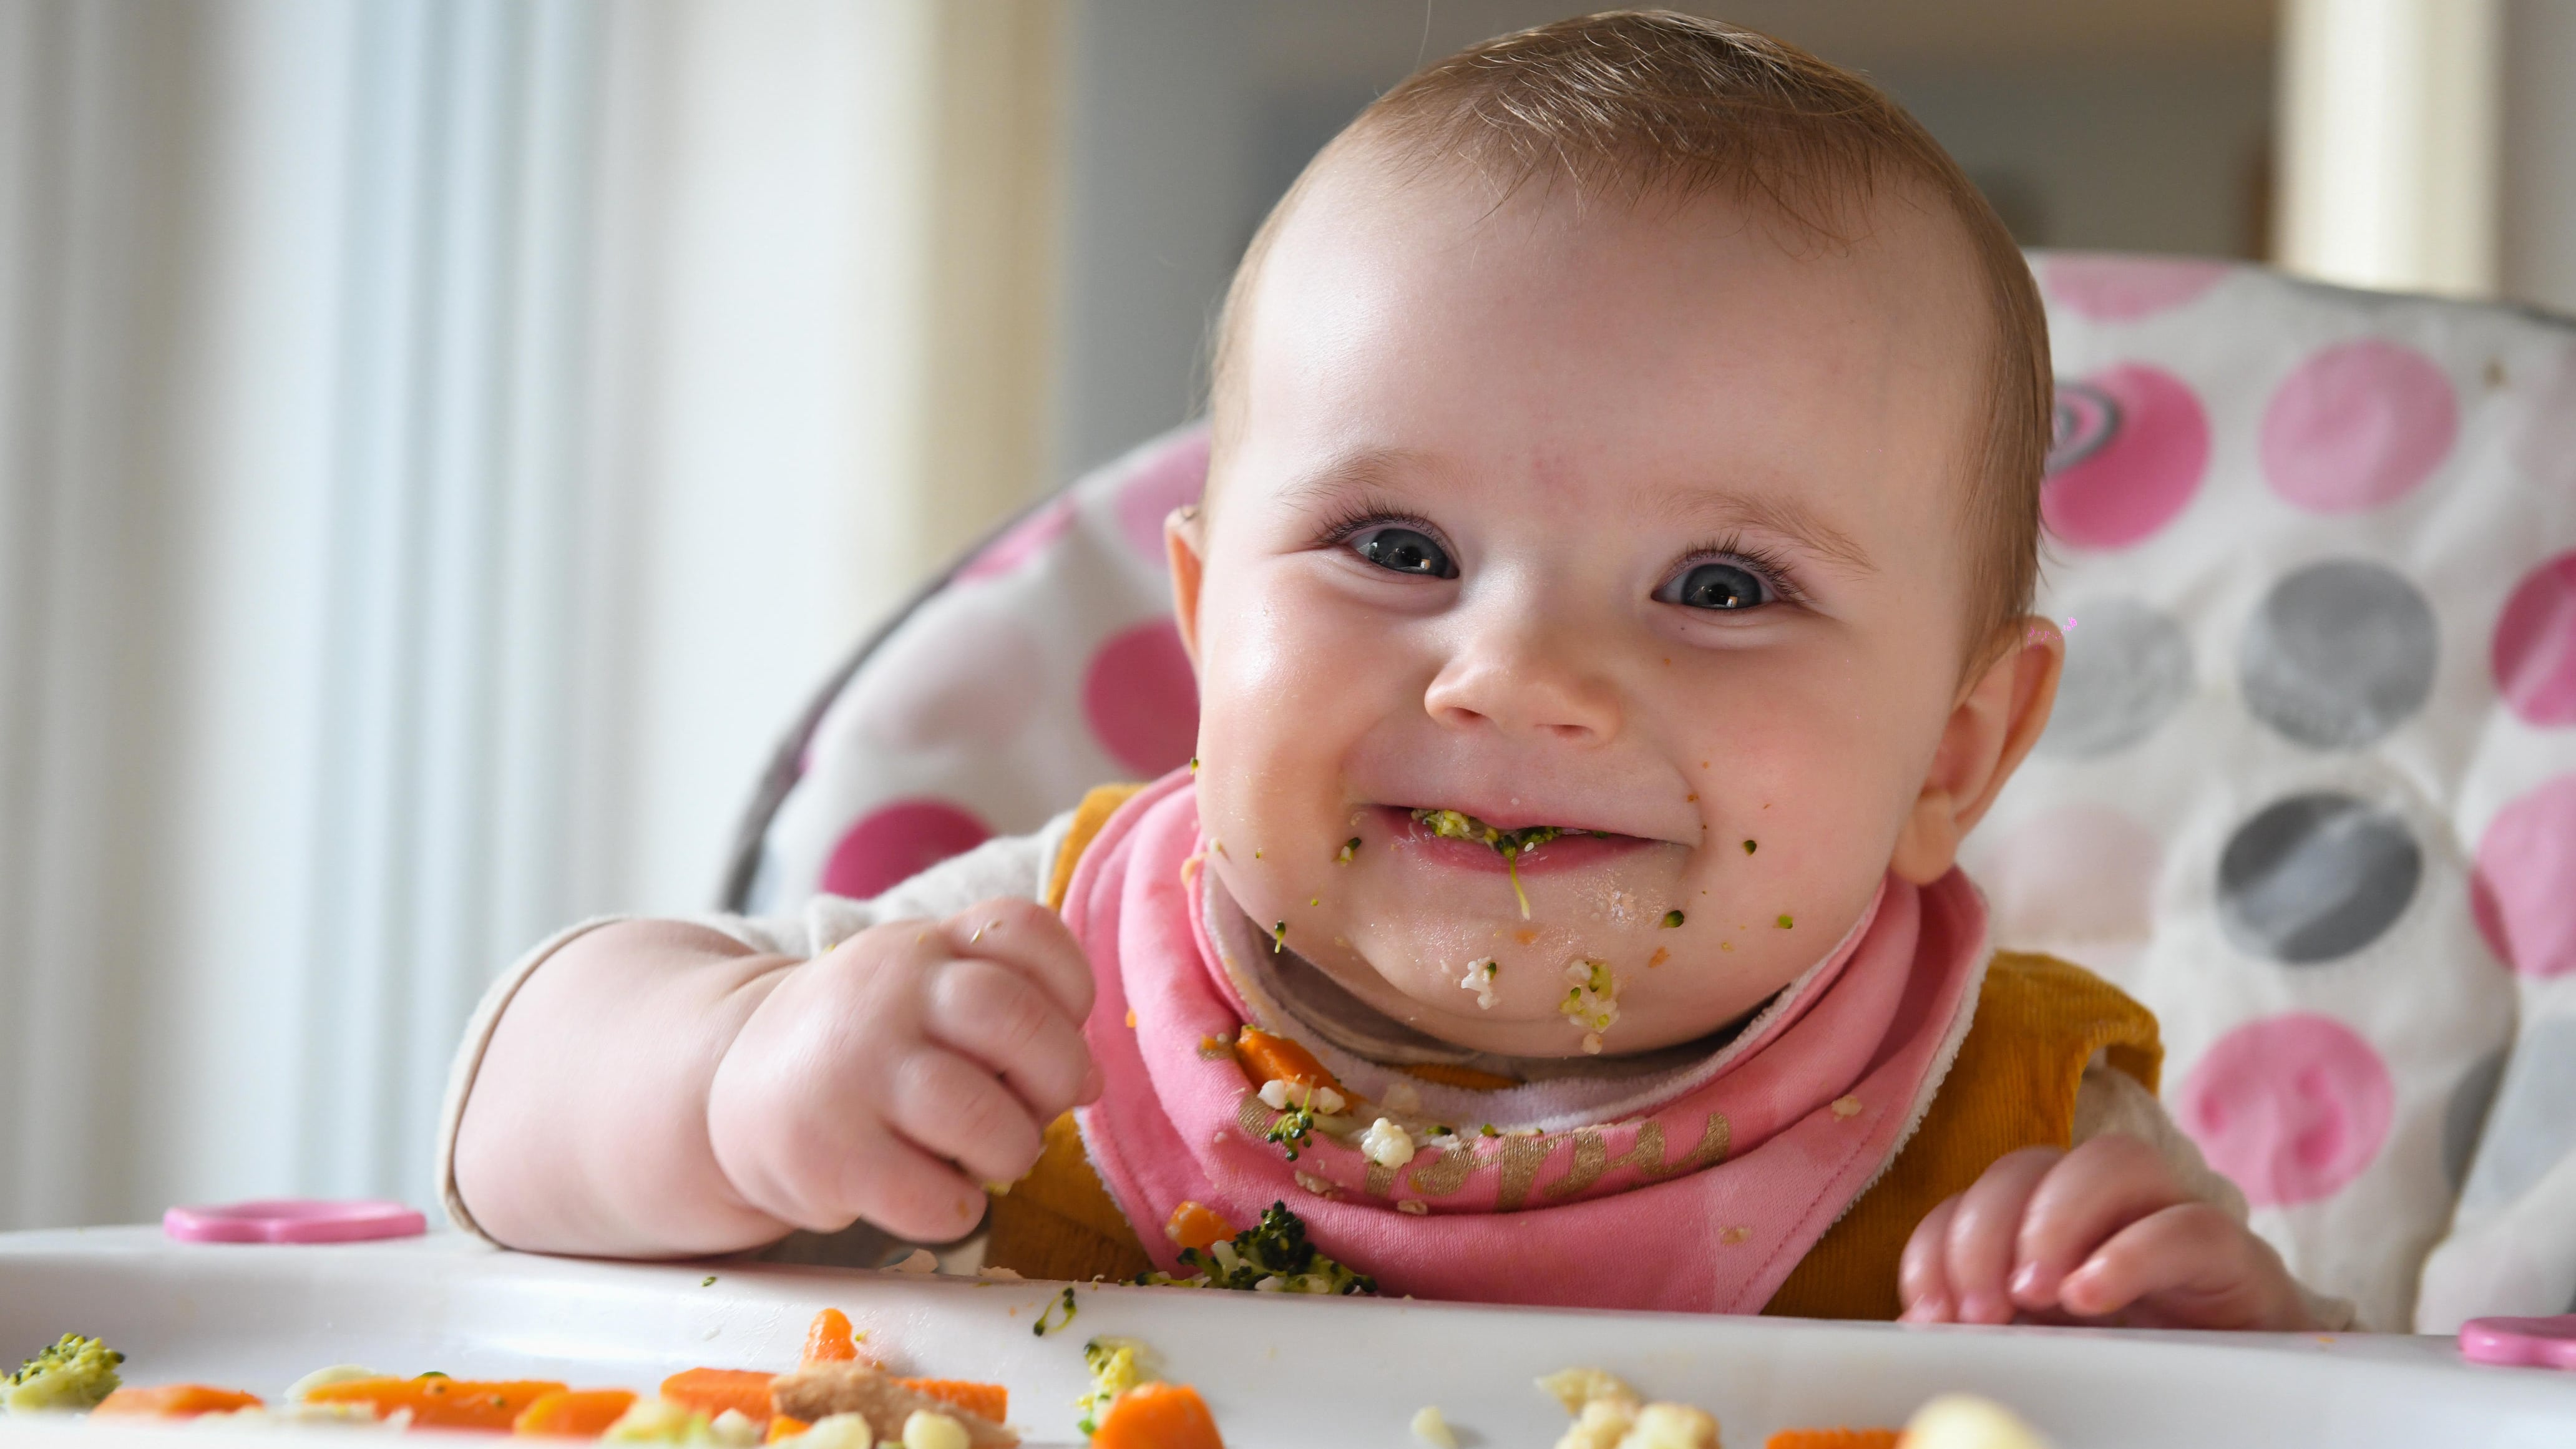 Baby-led weaning furnishes ample calories for growth and development, scientists say